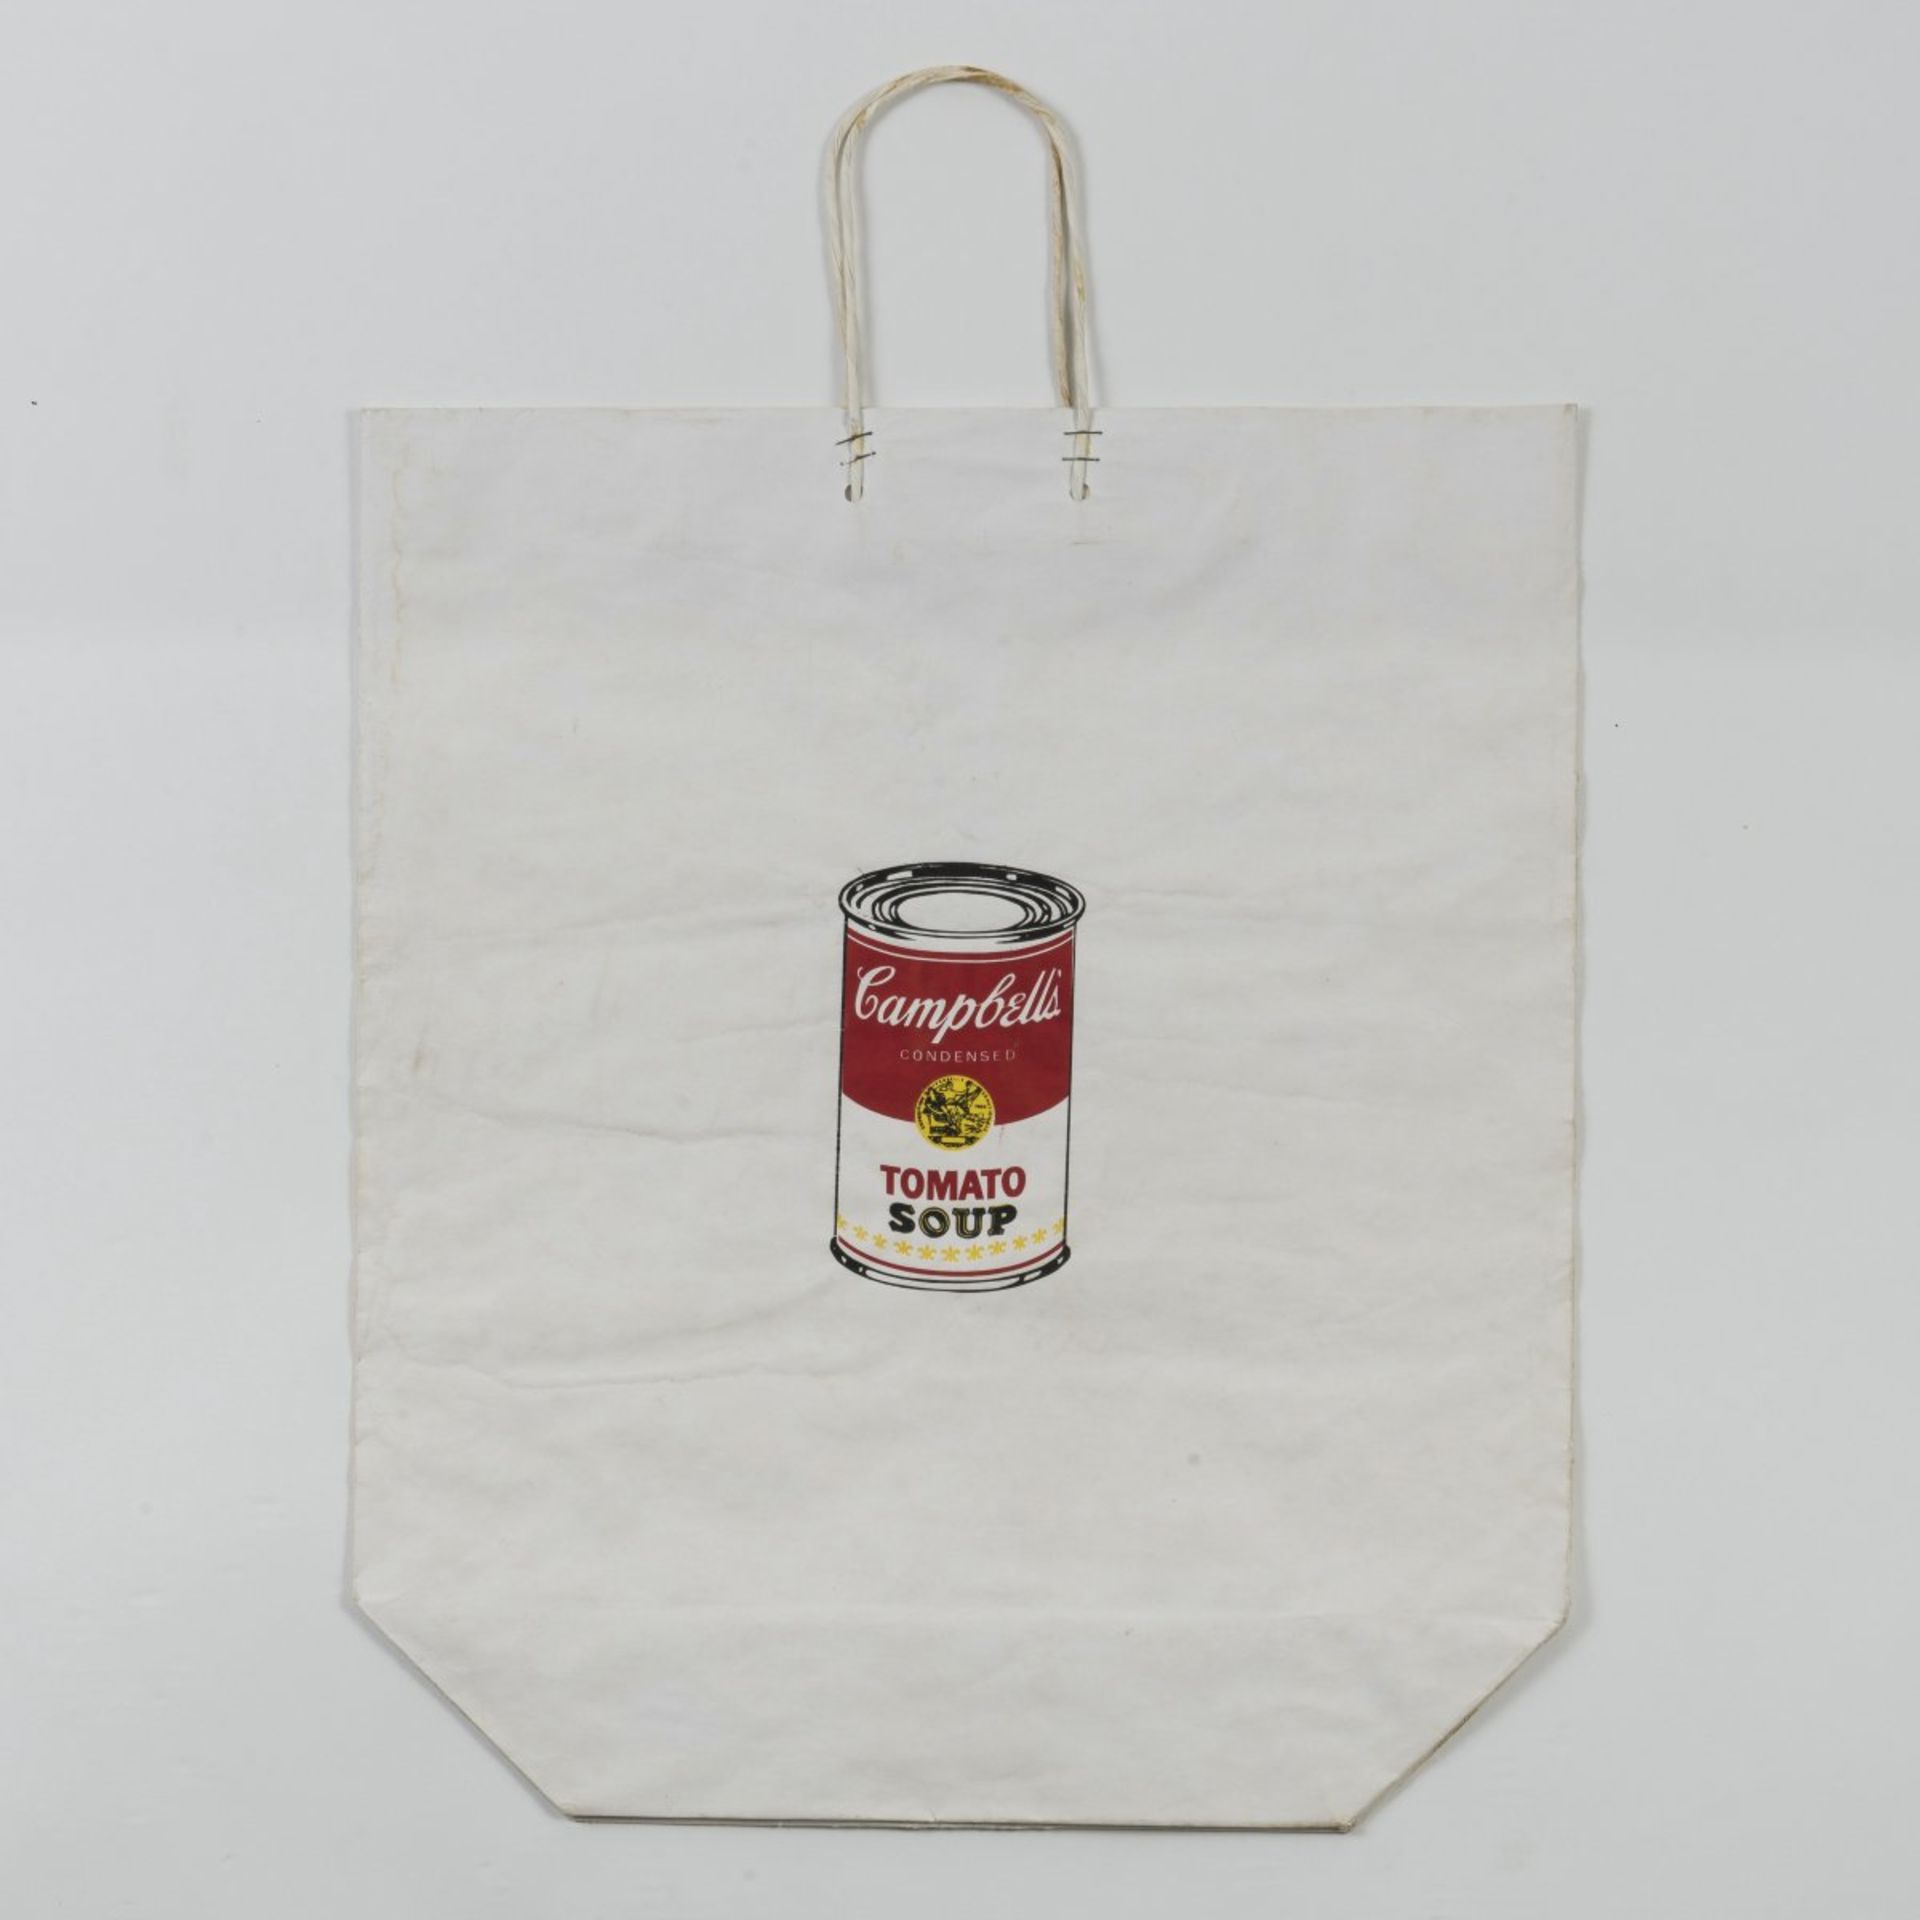 Andy Warhol, 'Campbell's Tomato Soup Can Shopping Bag', 1964